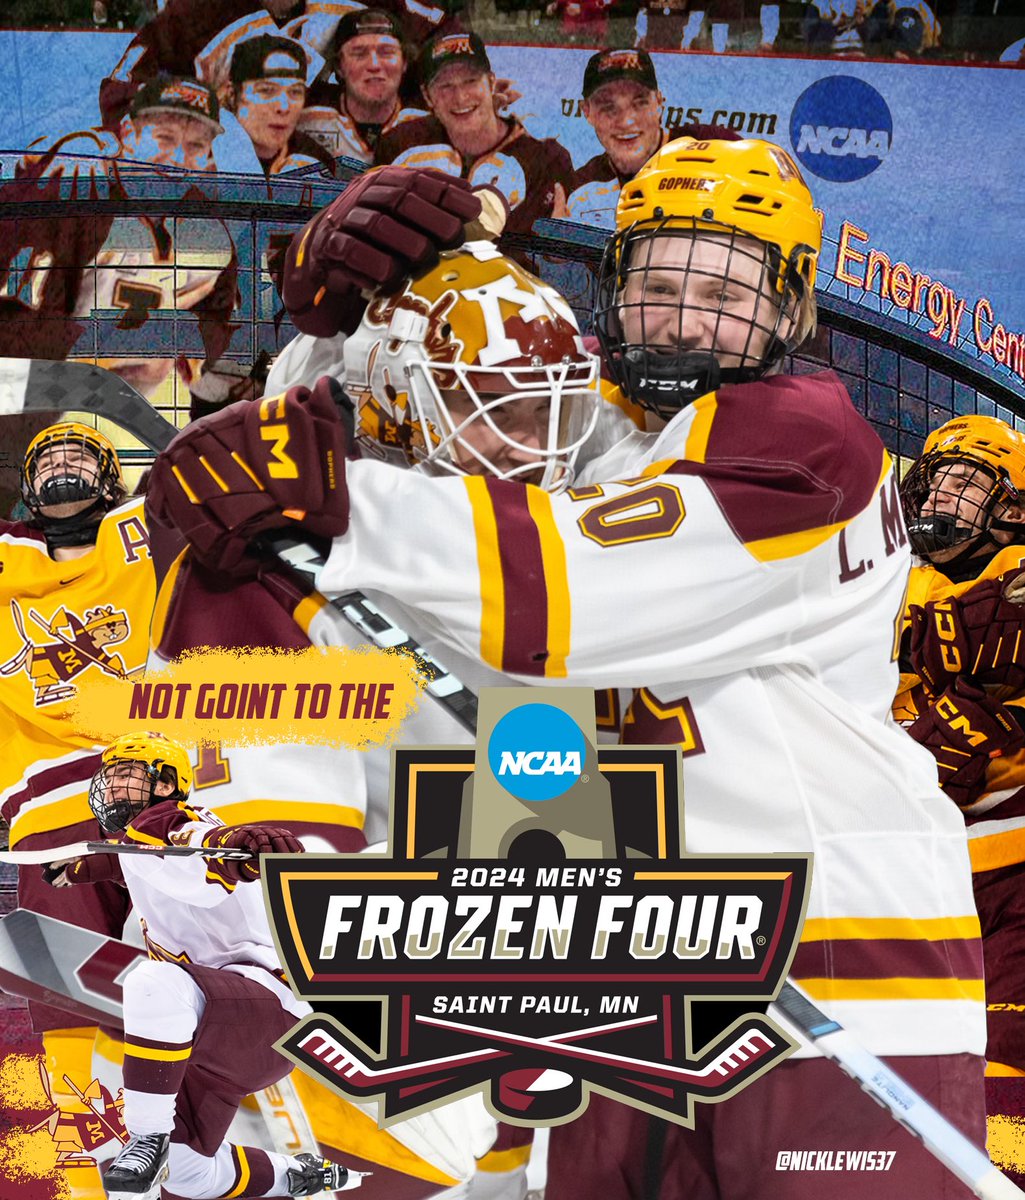 I made this Gopher Hockey graphic that I was really excited to use had they advanced to the Frozen Four. But, they didn’t. So instead of never using it, I changed it. 😫😭😭

#Gophers #NCAAHockey